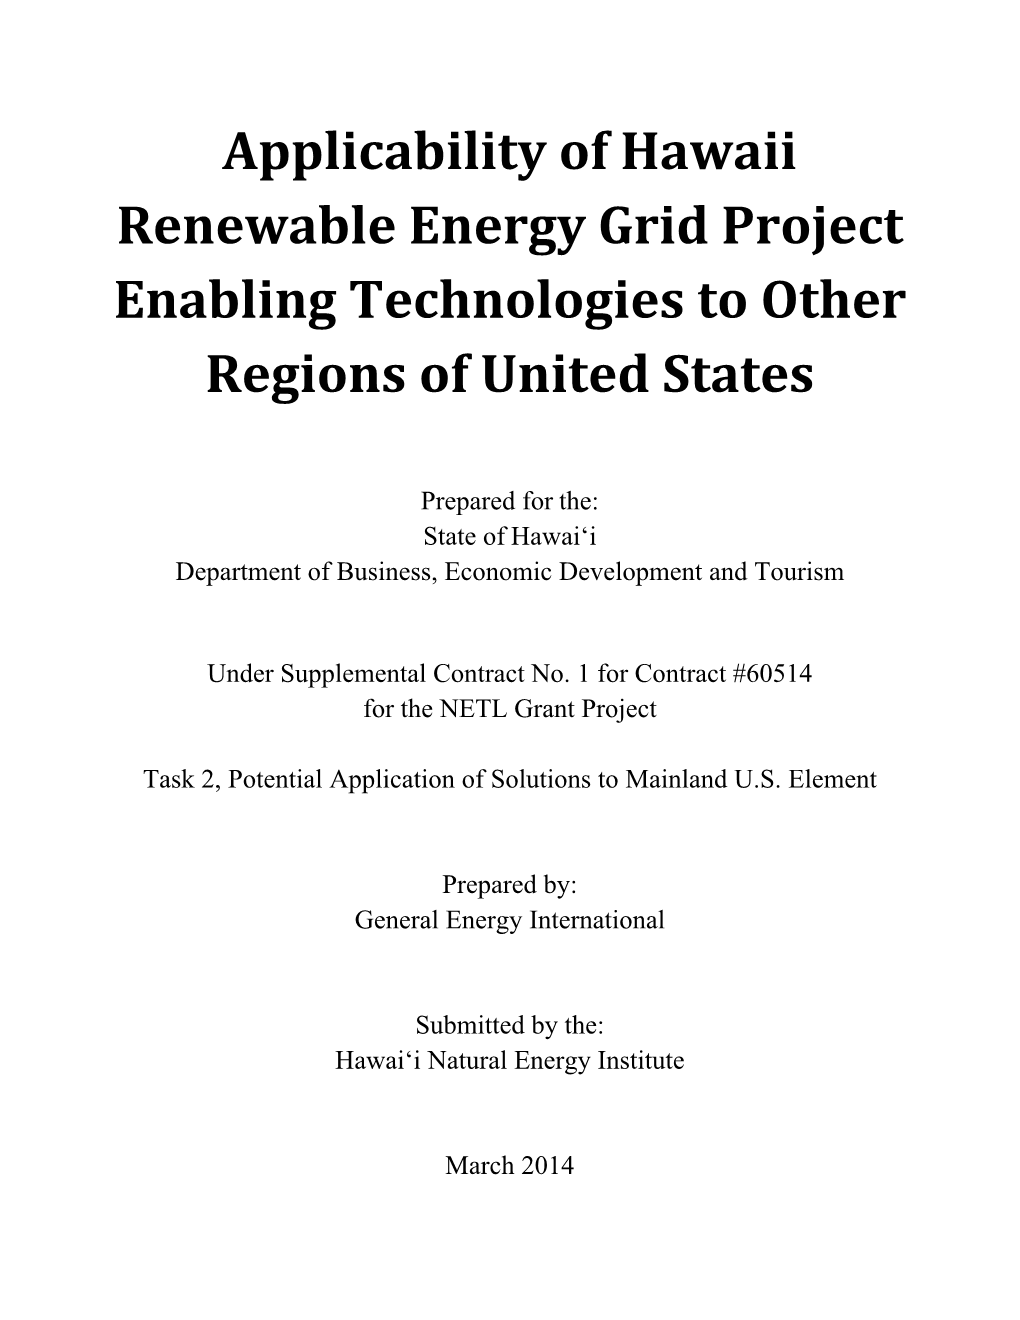 Applicability of Hawaii Renewable Energy Grid Project Enabling Technologies to Other Regions of United States